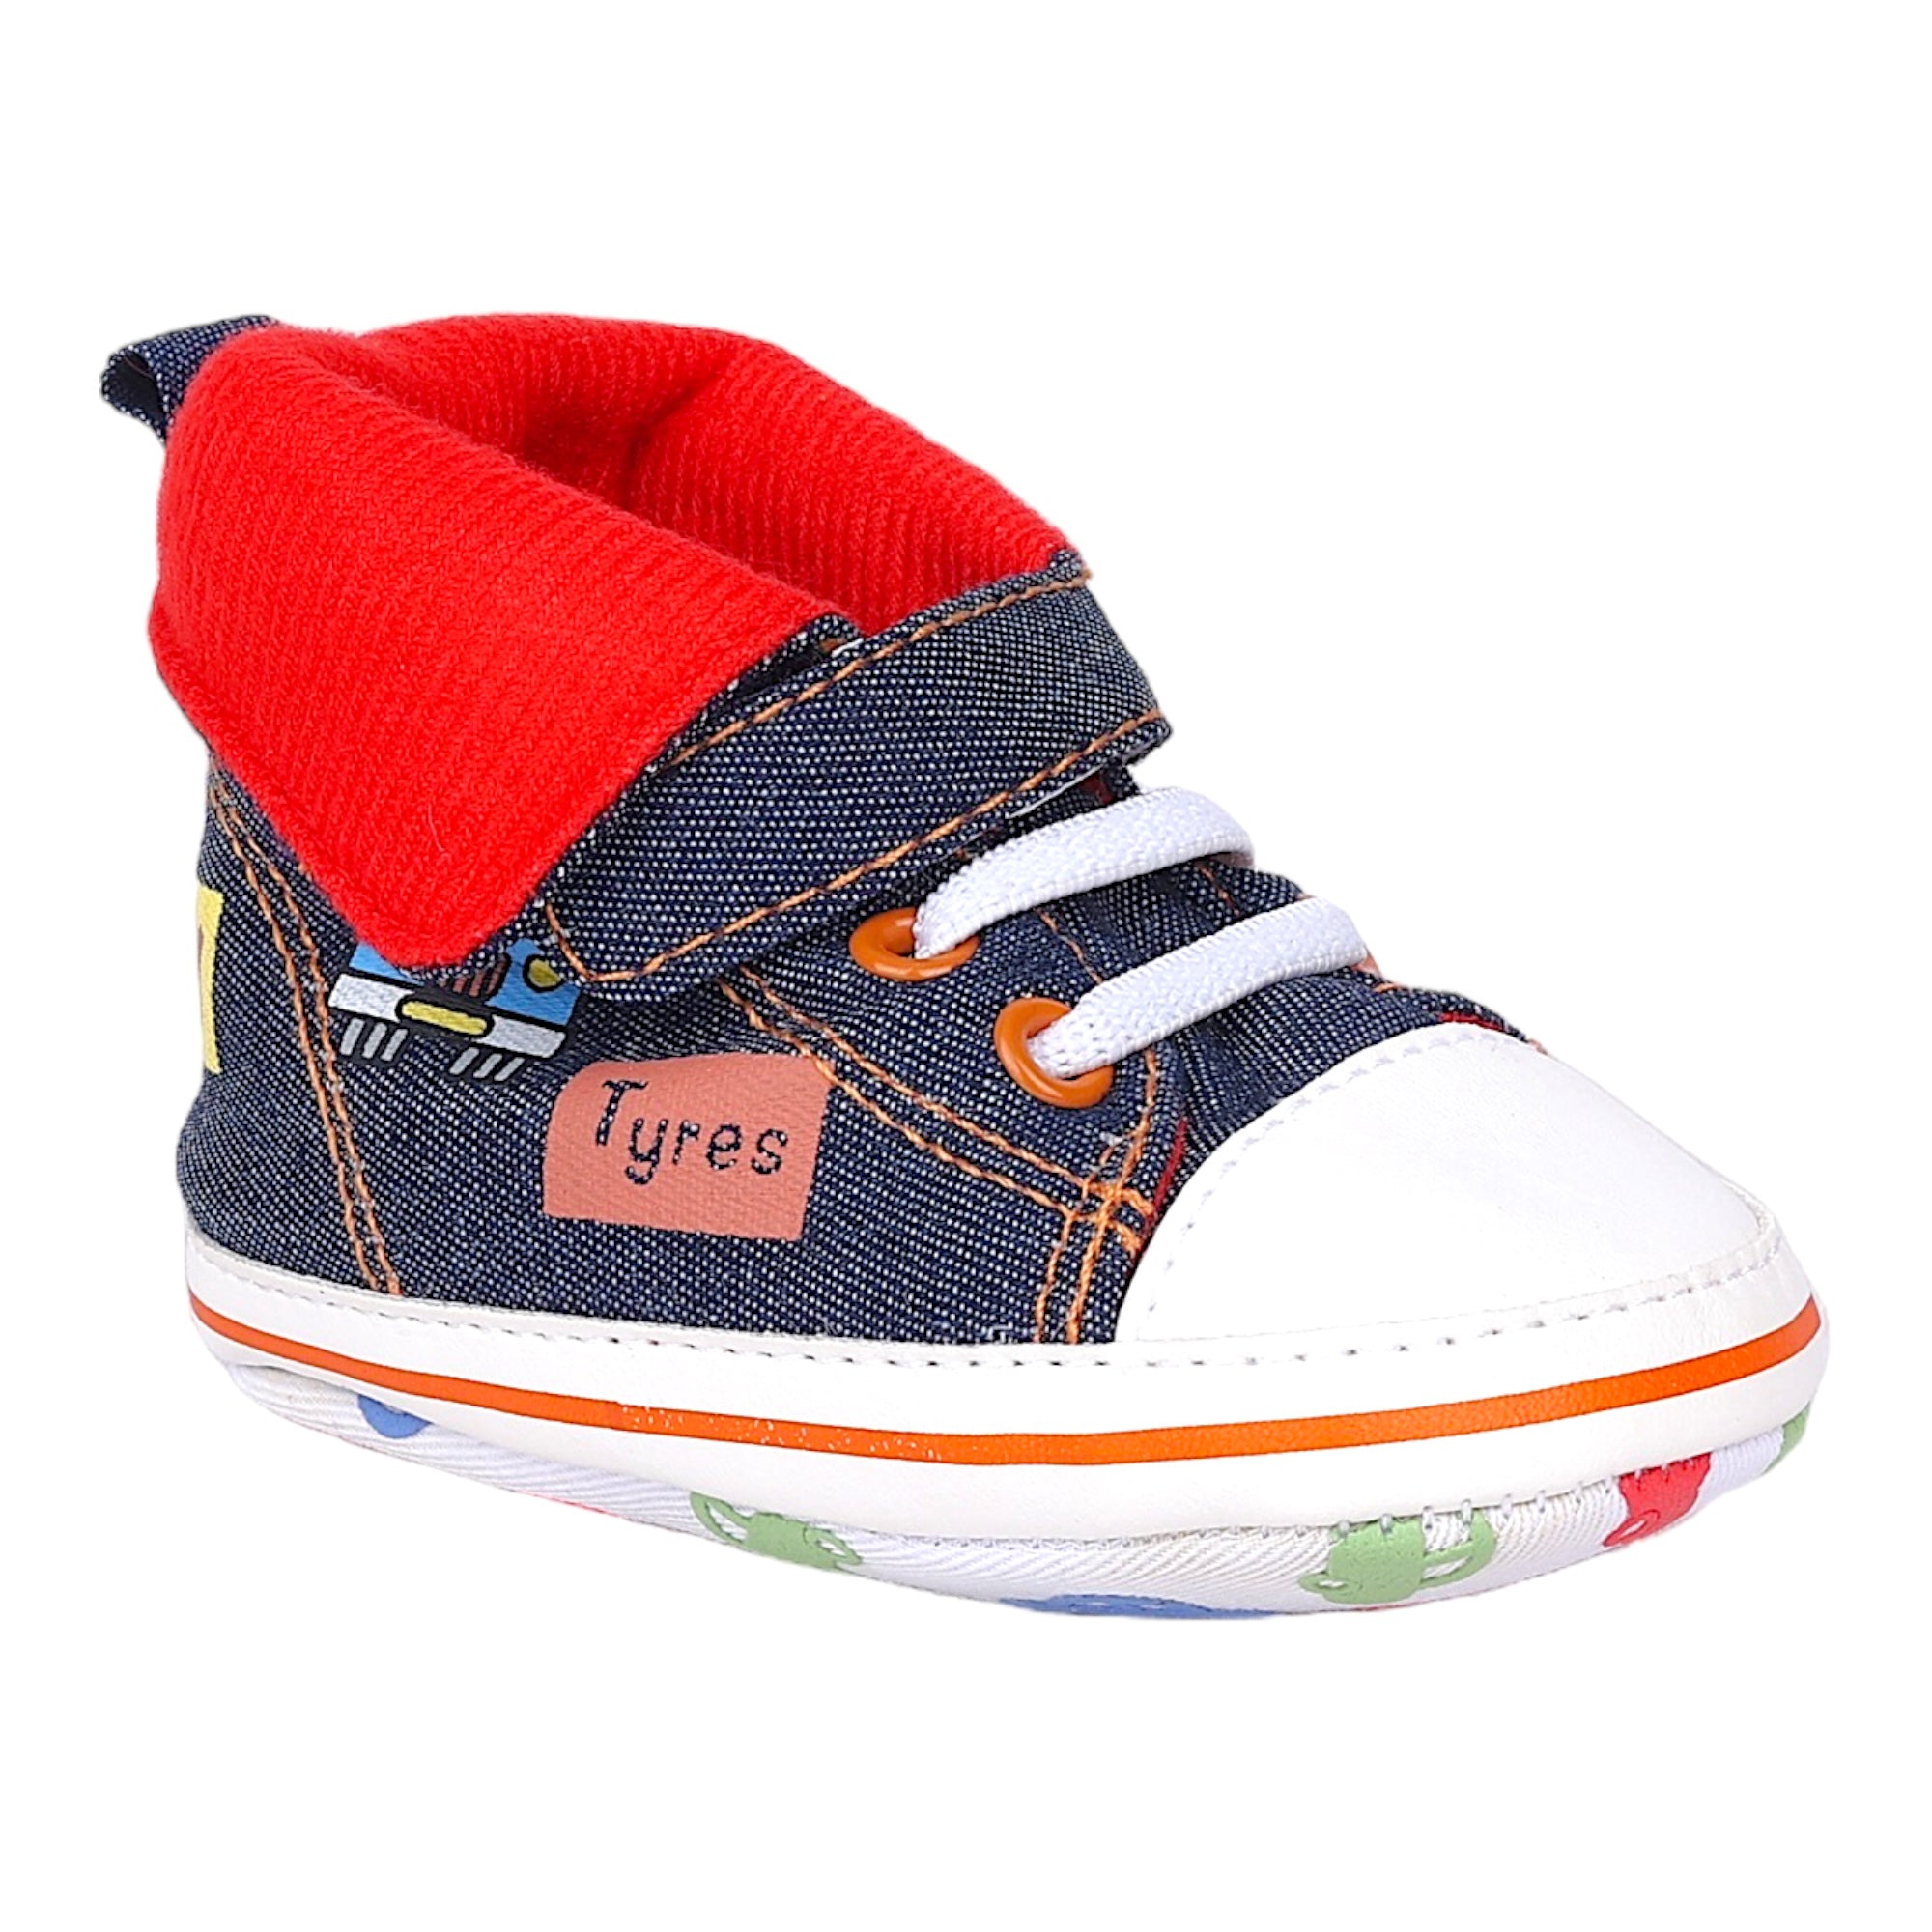 Baby Moo Lace-Up Imitation Denim High Top Infant Sneakers - Blue, White